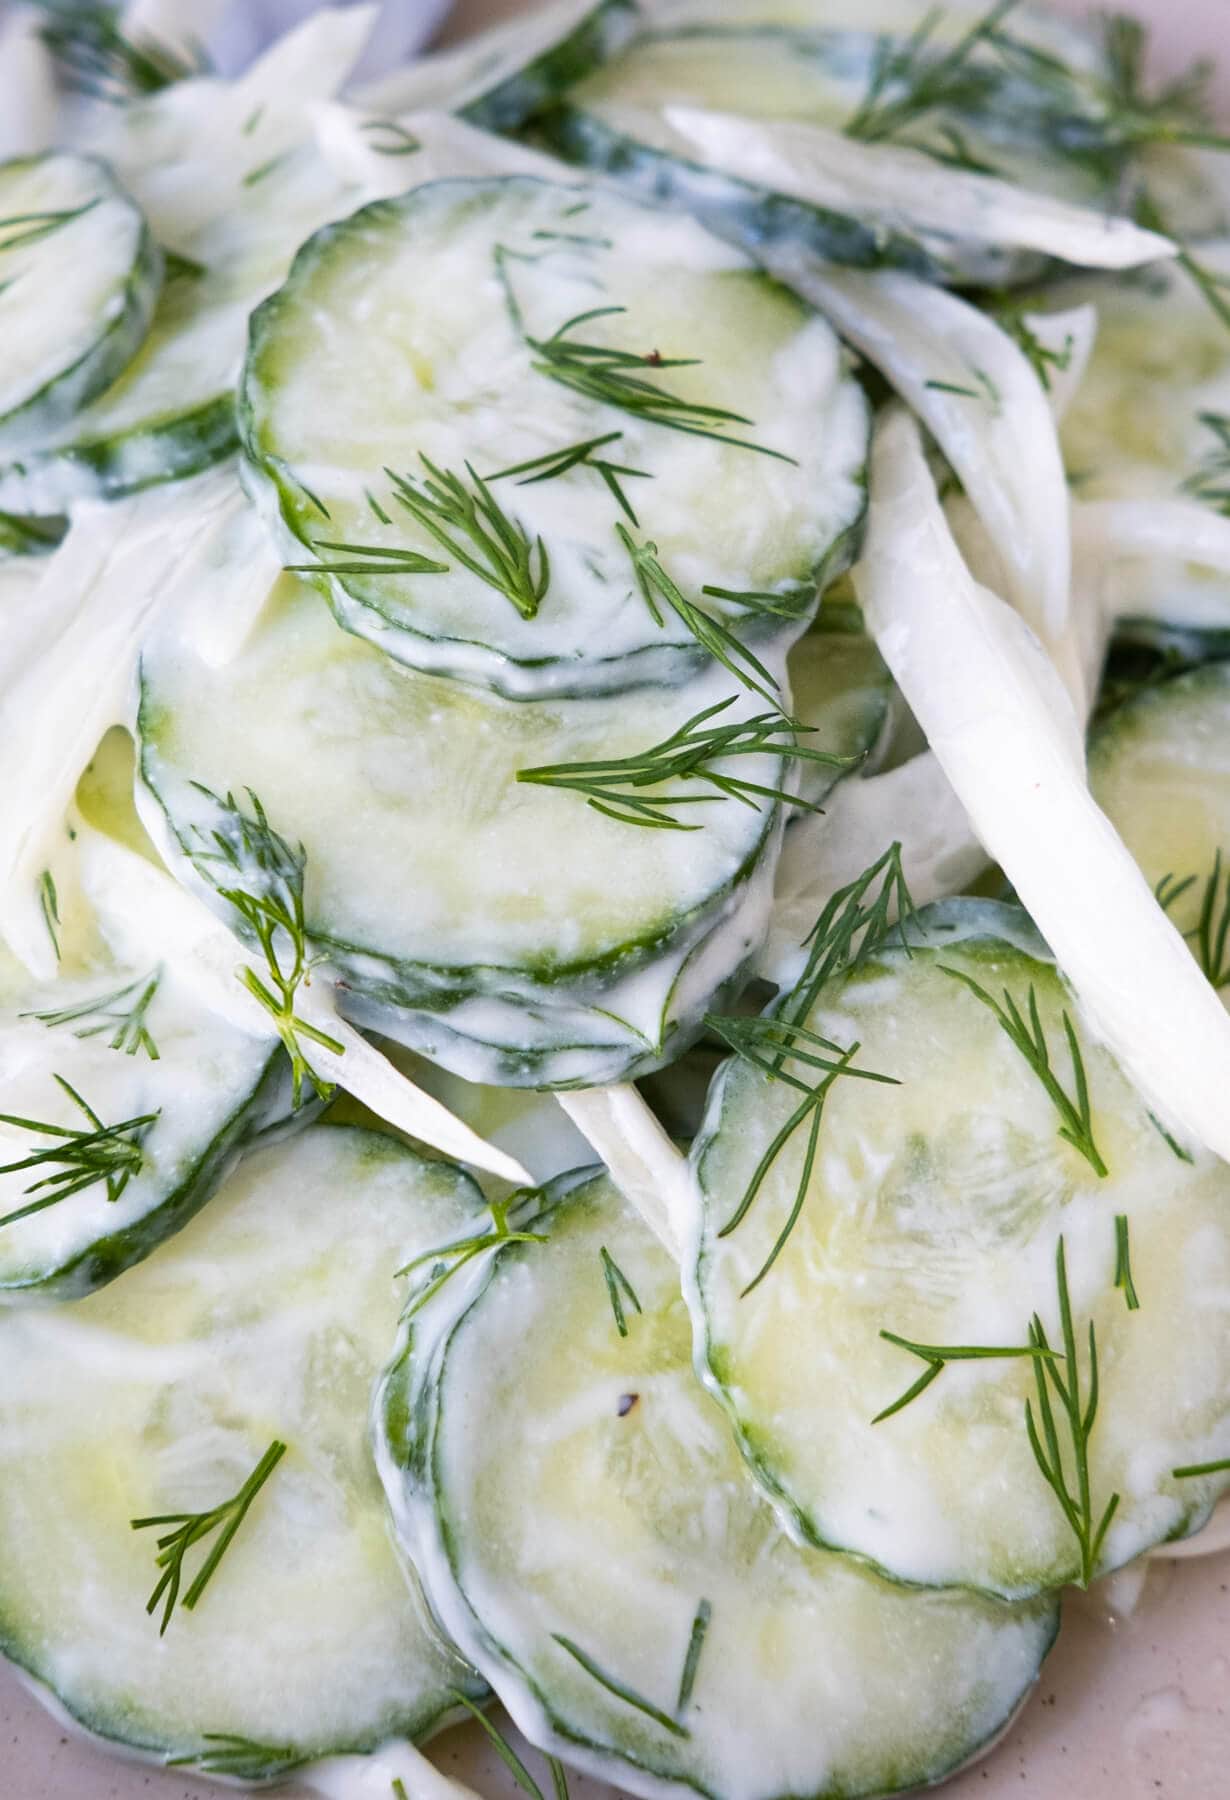 Thin slices of creamy cucumber salad with fresh chopped dill sprinkled on top.